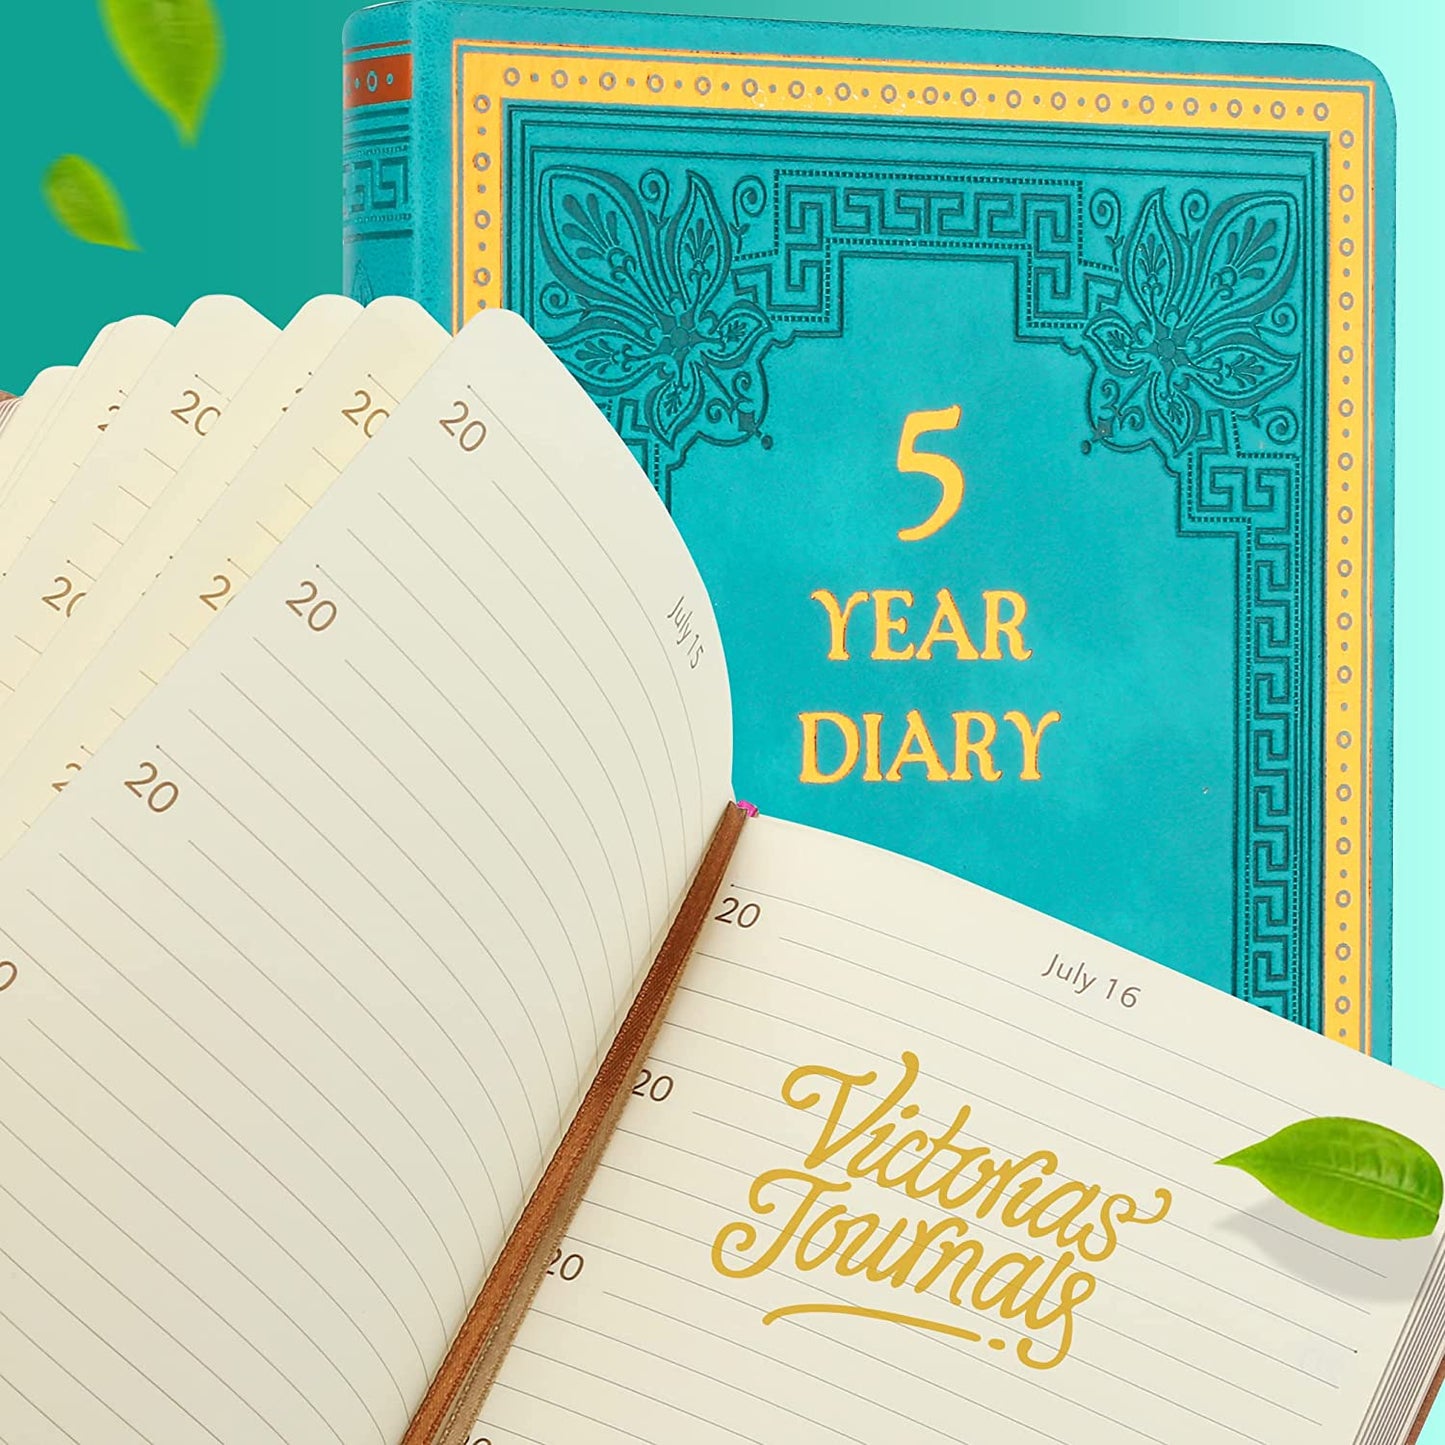 Five-Year Vintage Look Diary (Motivational, Prayer, Gratitude, Mindfulness, Self-Help and Daily Affirmations) 4.64x6.6", 394p. (Teal)